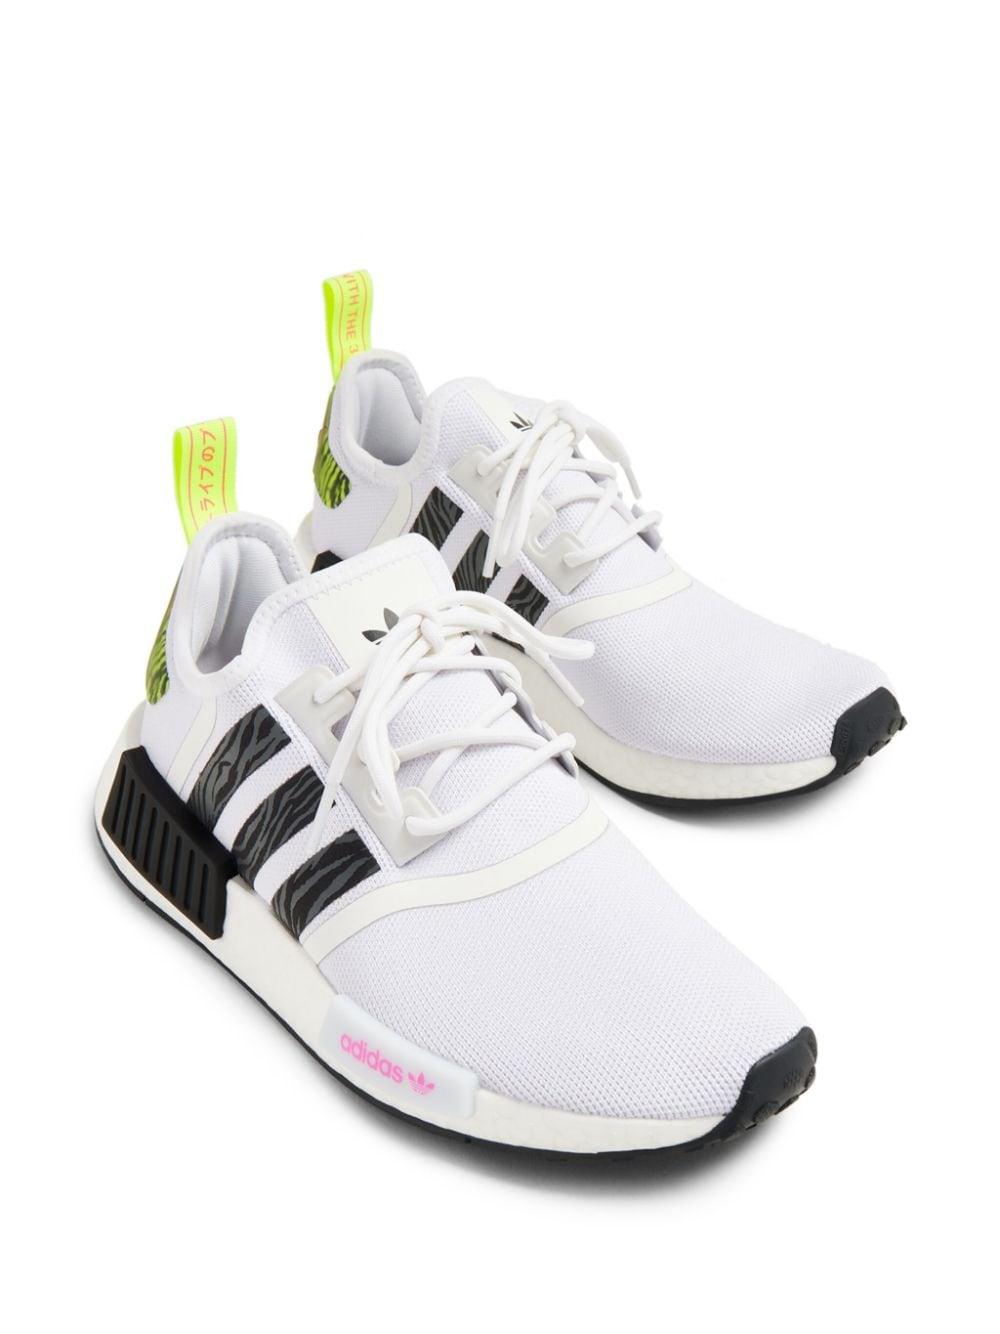 adidas Nmd R1 Mesh Sneakers in White | Lyst